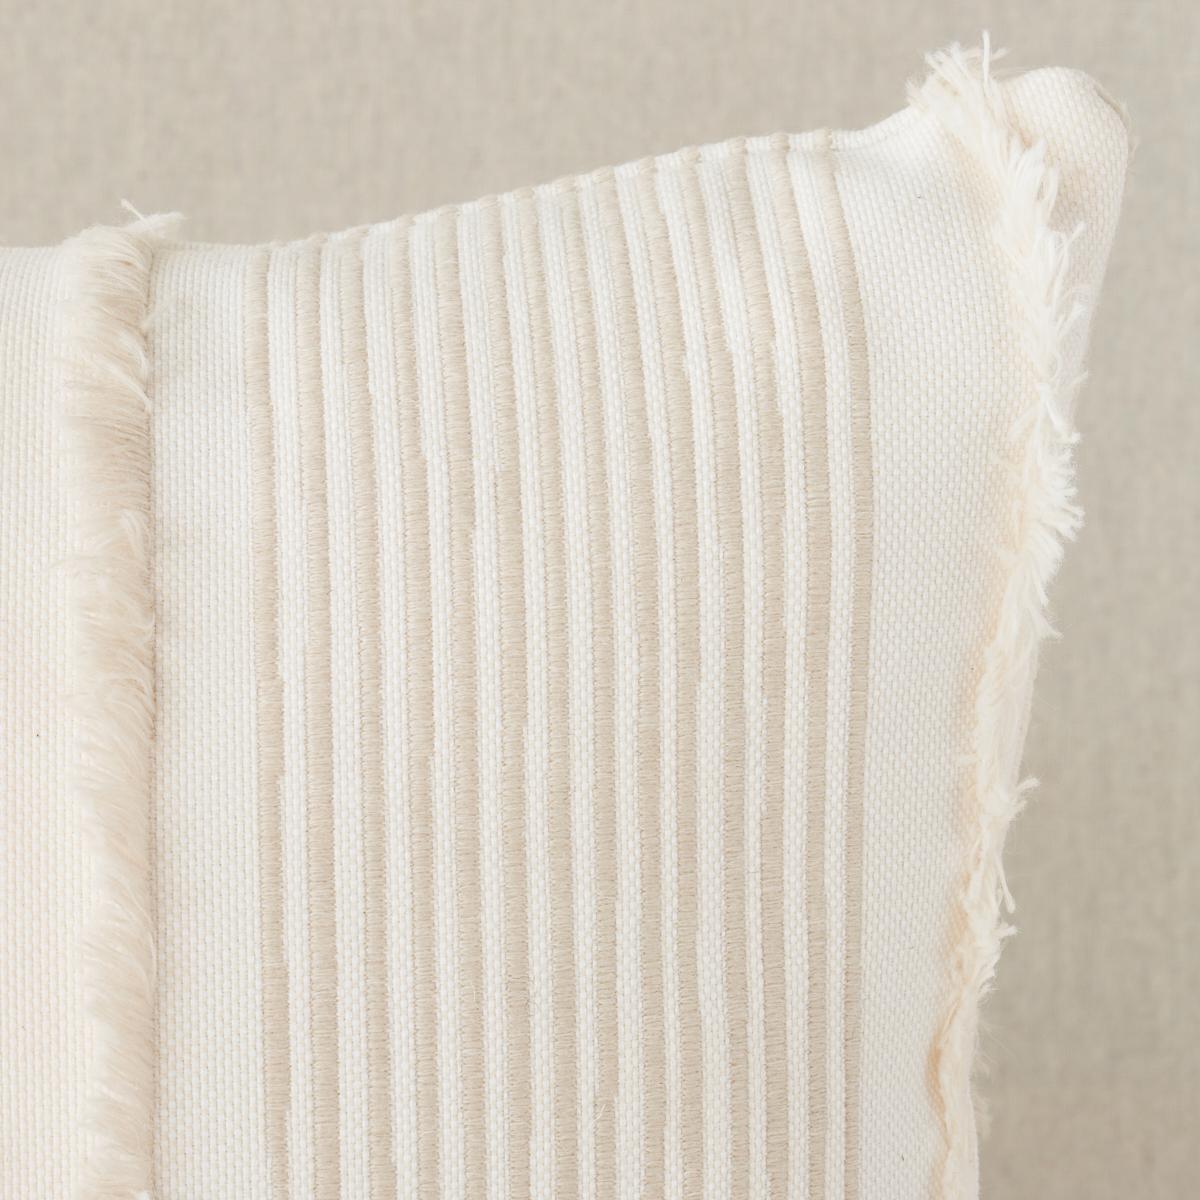 This pillow features Billy Indoor/Outdoor with a knife edge finish. A stunning combination of cut fringe and skinny pencil stripes, Billy Indoor/Outdoor in black is an elegant textural tonal stripe with a remarkably soft drape and luxurious hand.